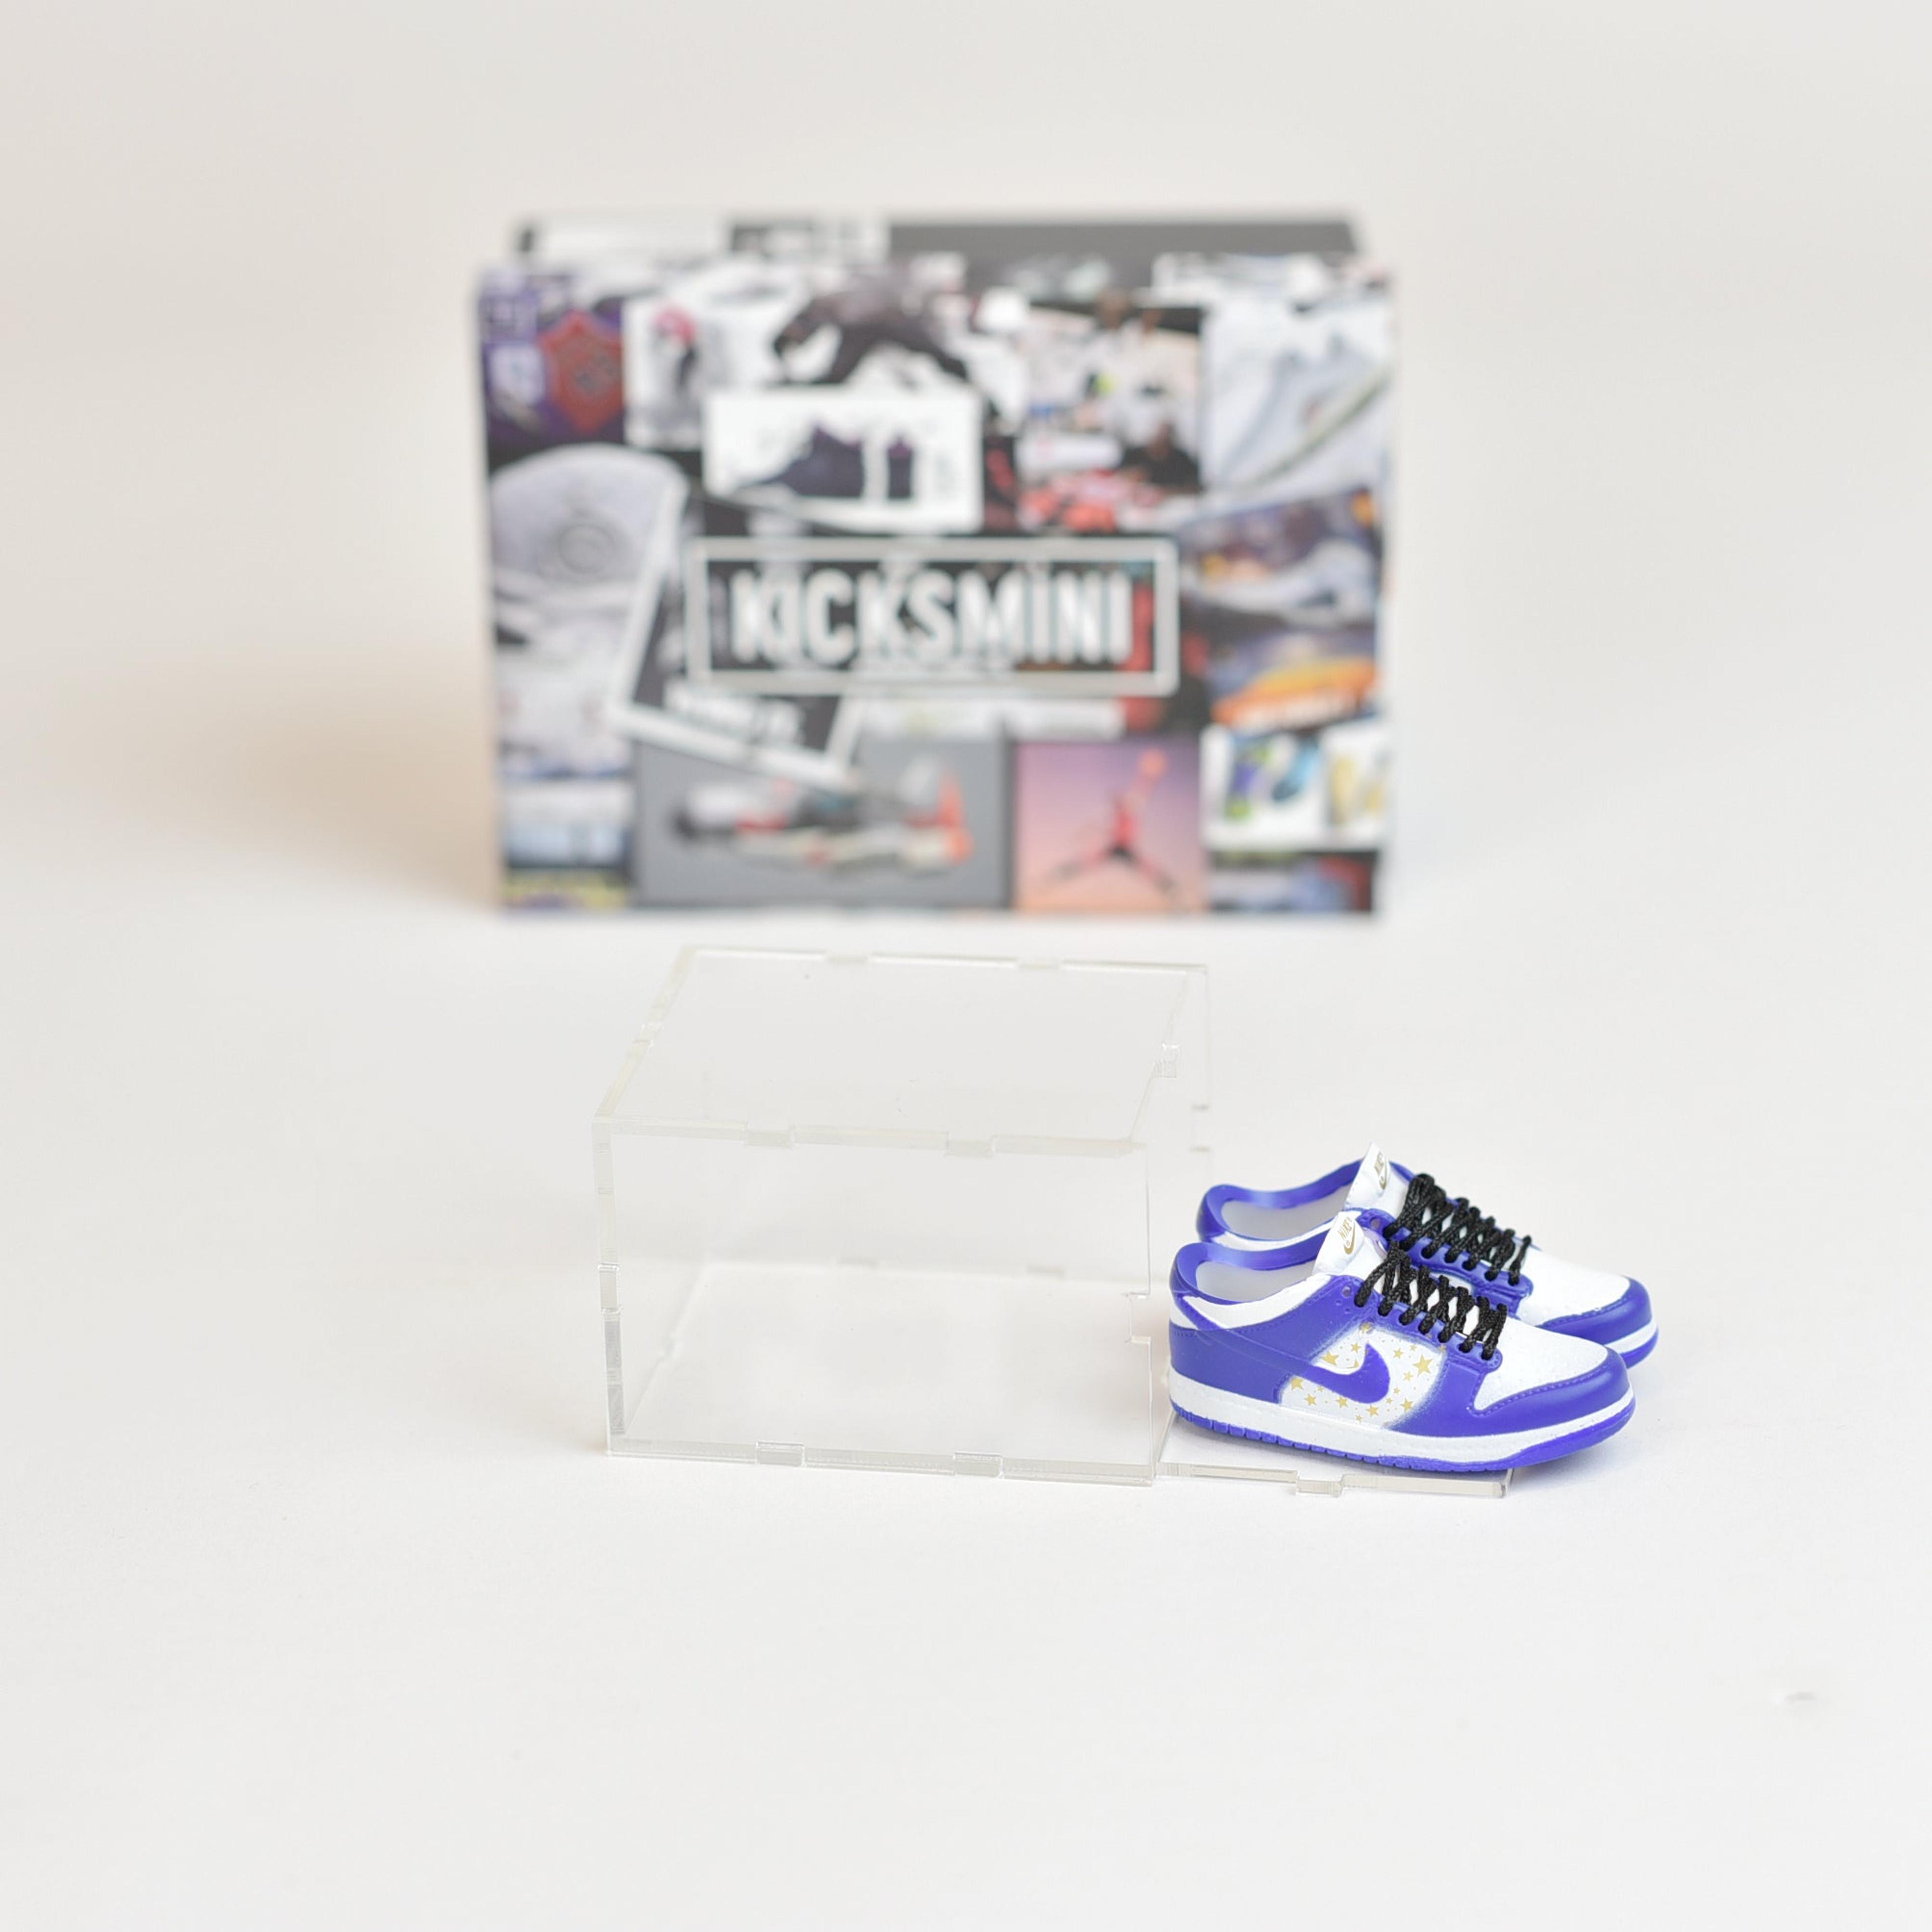 Alternate View 35 of SB Dunk Low Collaboration Mini Sneakers with Display Case